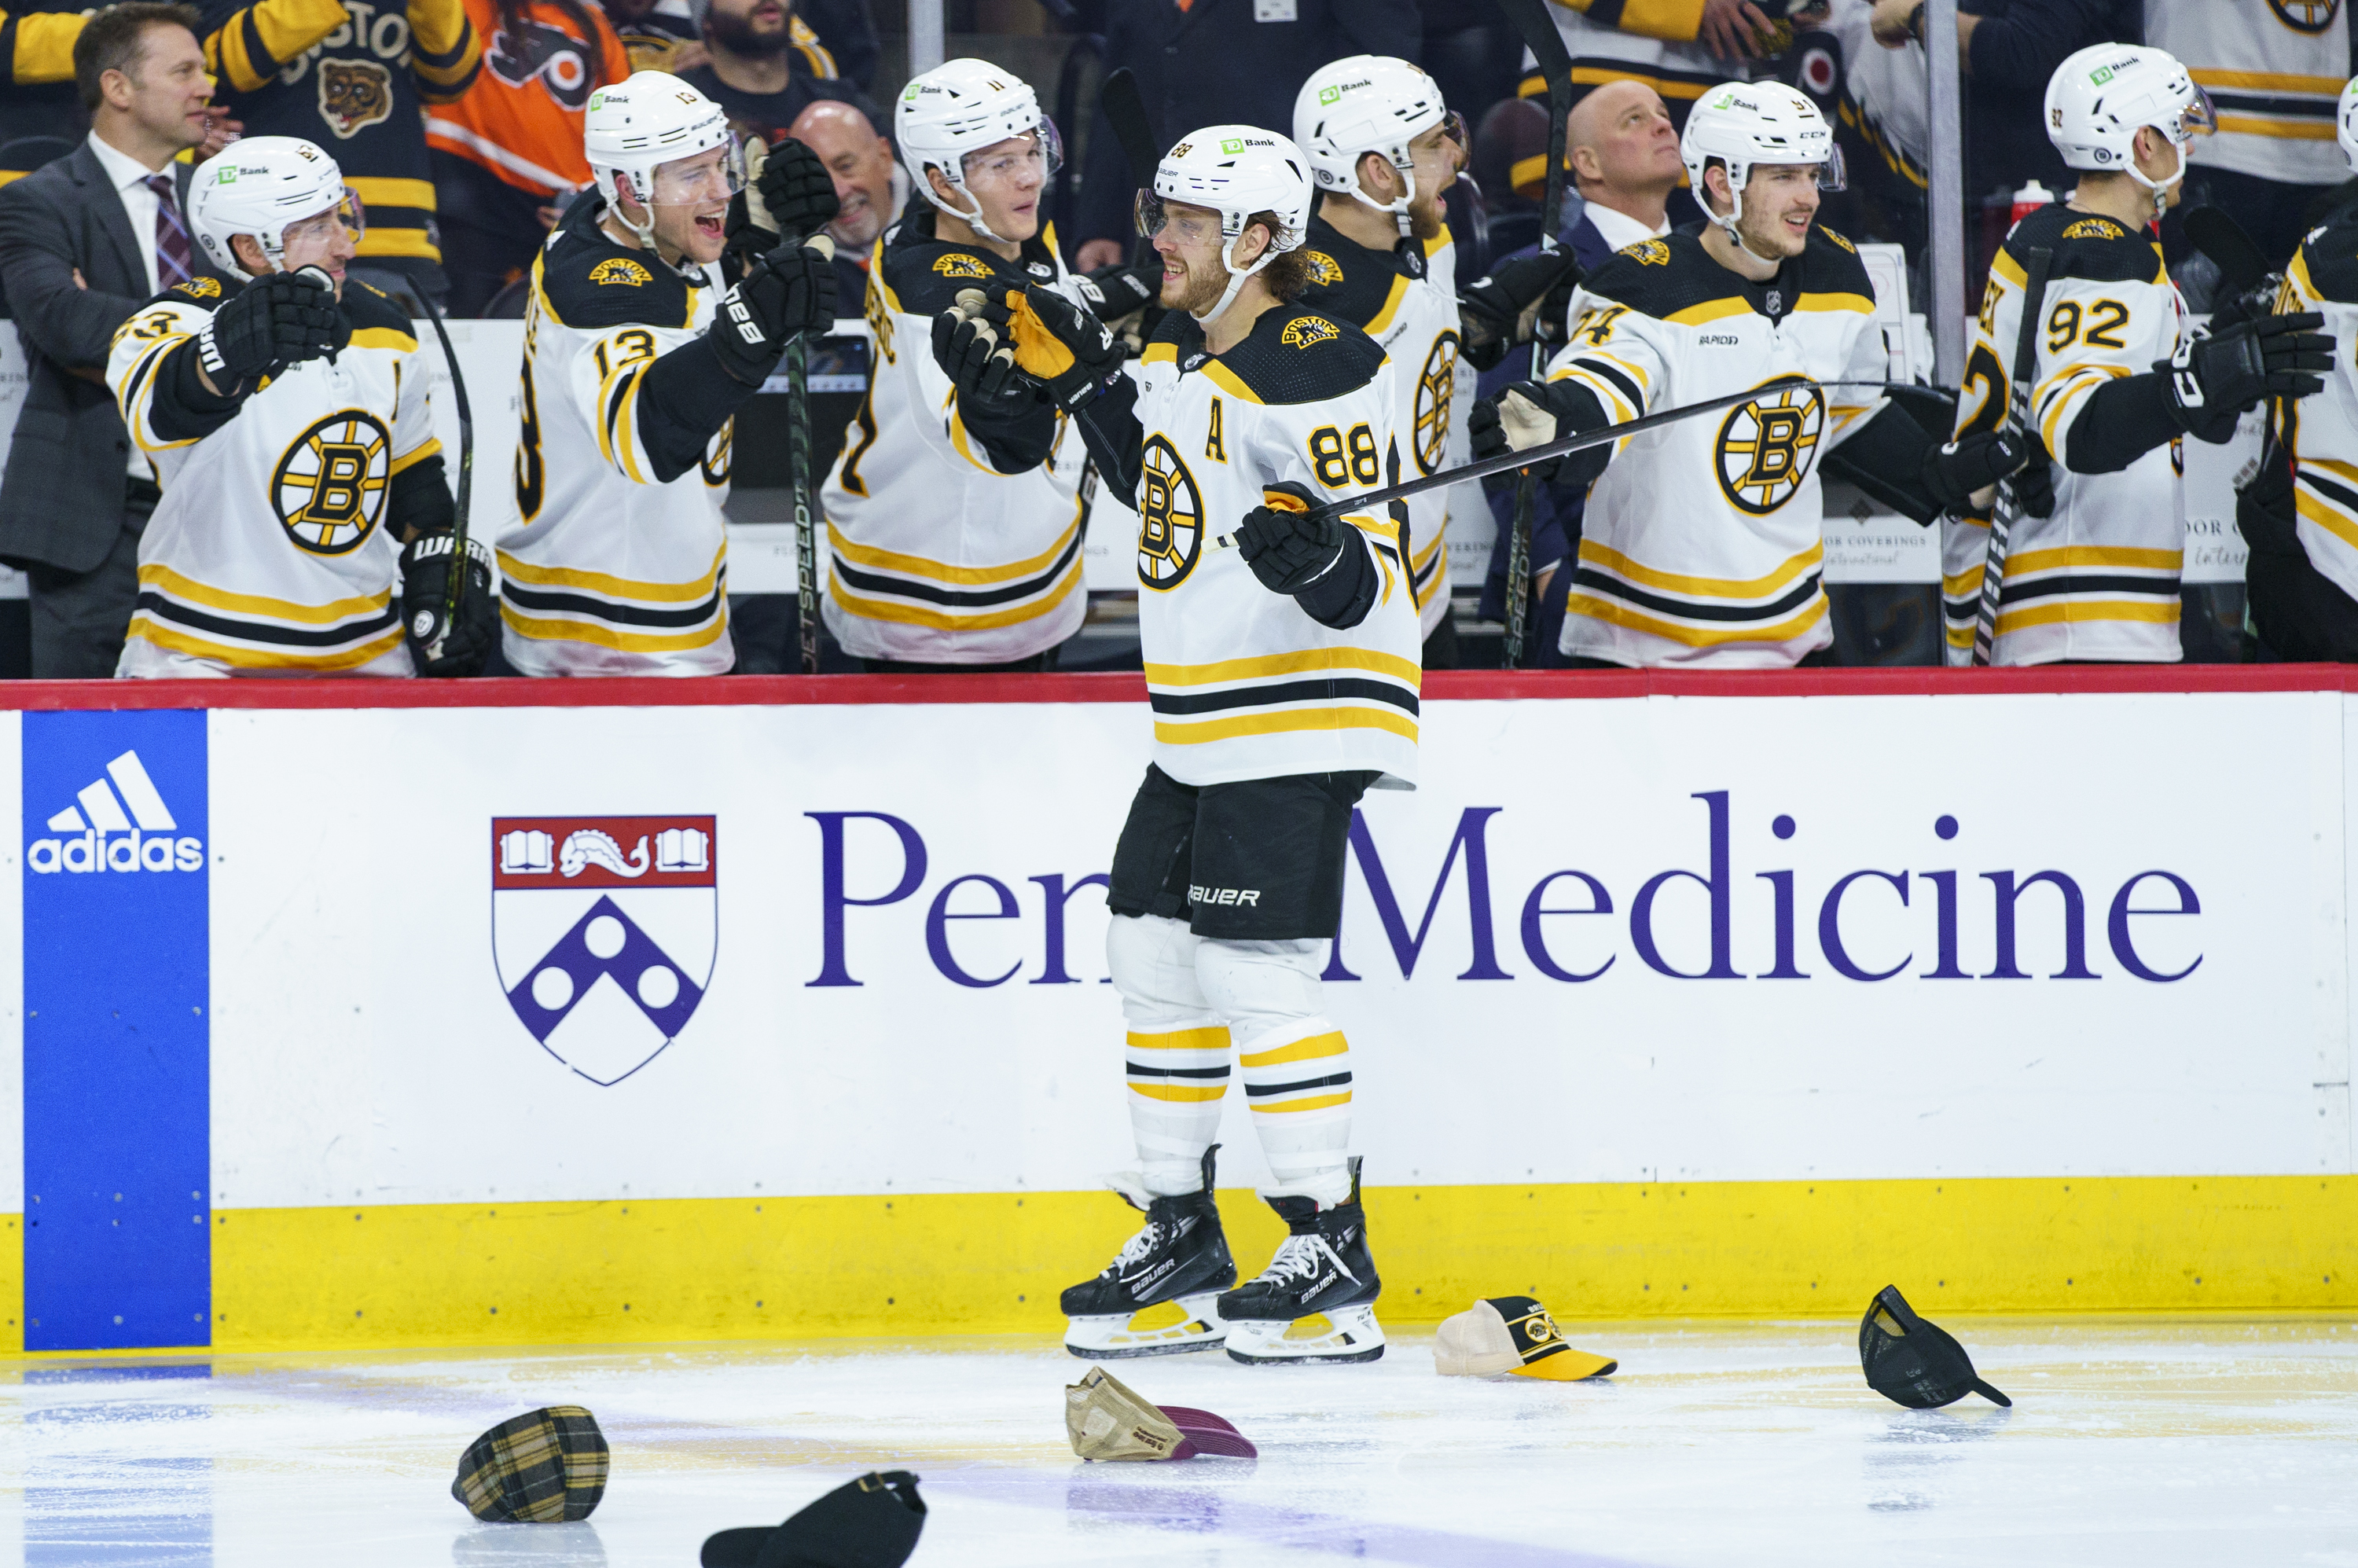 Watch Patrice Bergeron Skate With His Kids Prior To Cup Final